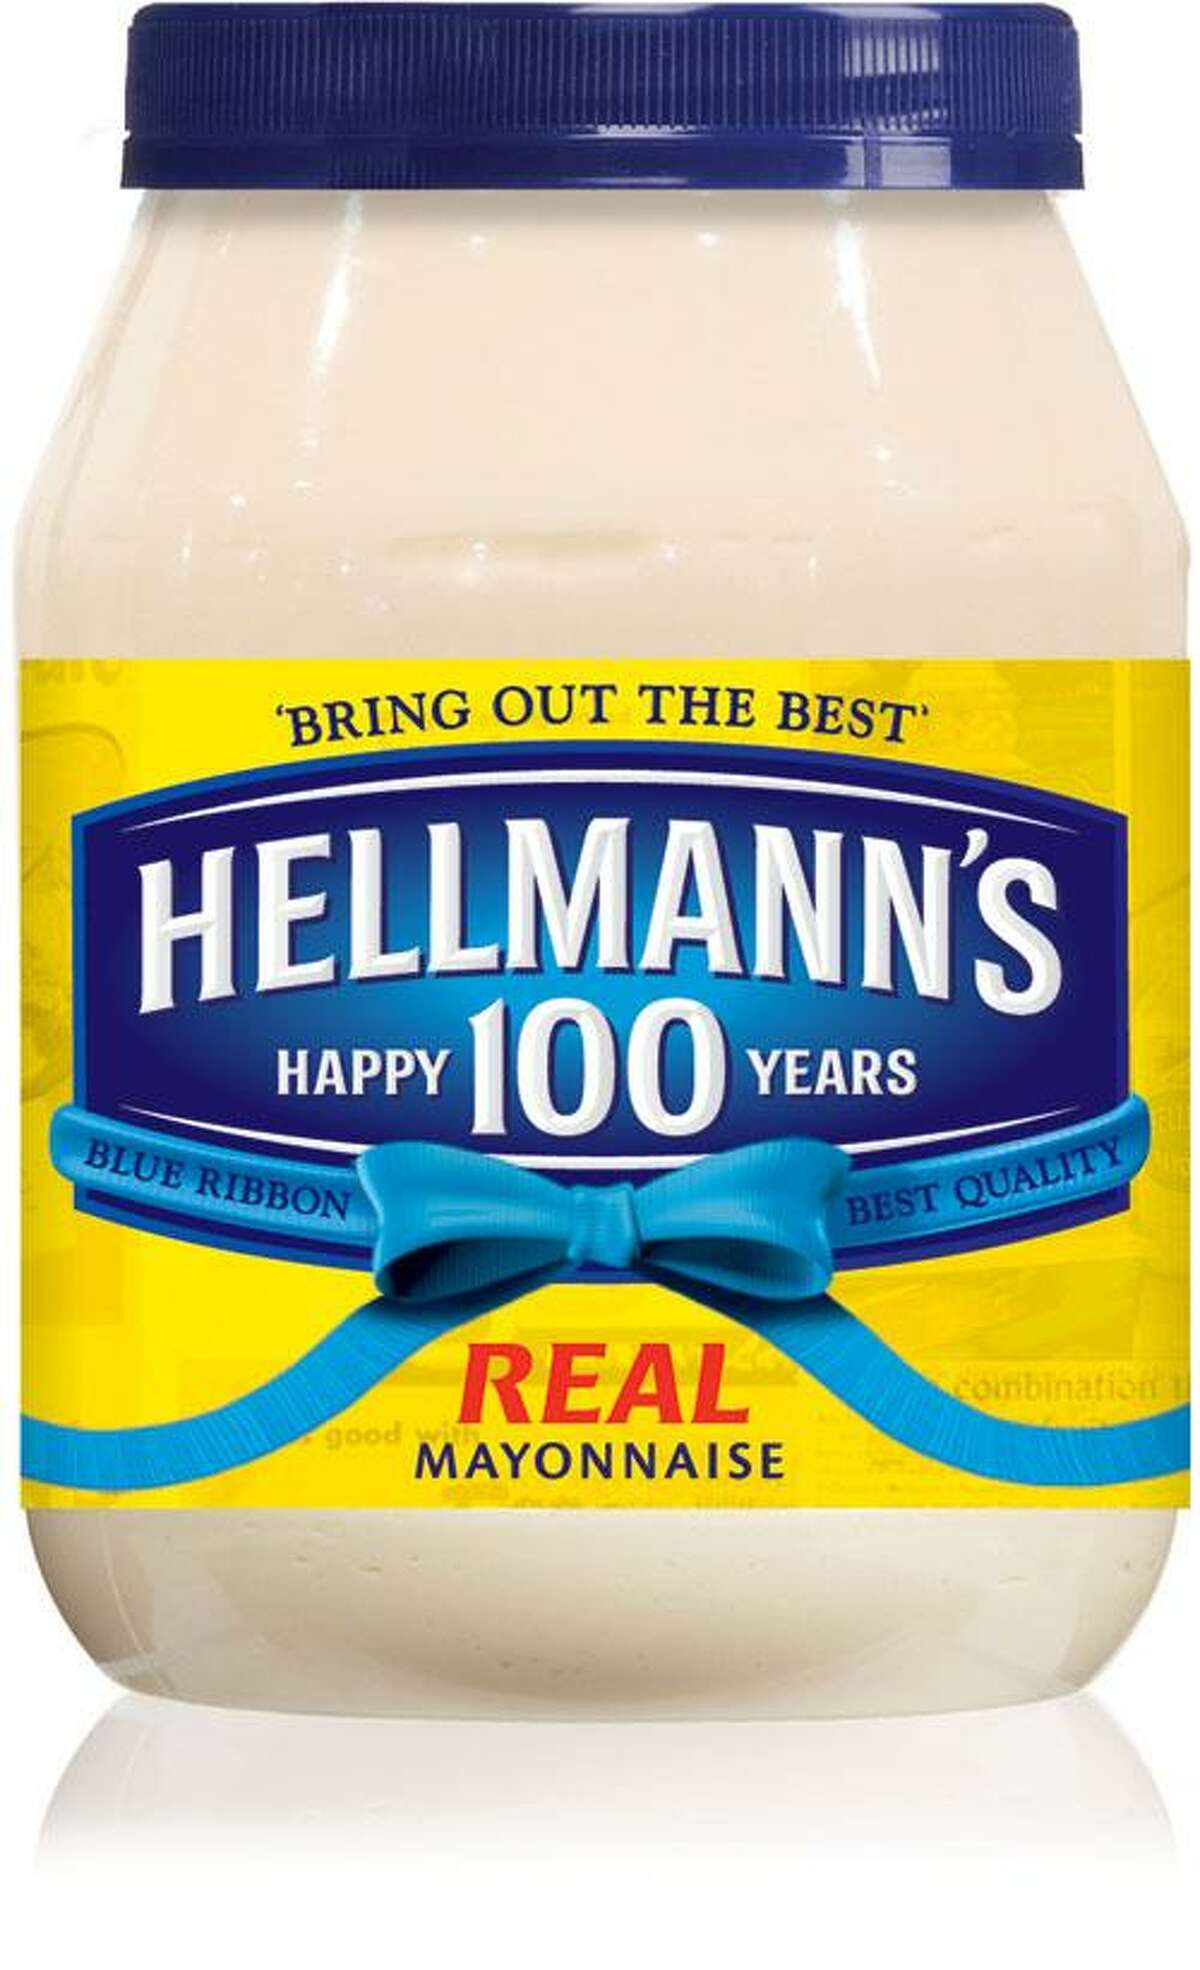 Millennials are still, kind of, using mayonnaise — just check the ingredients in aioli.